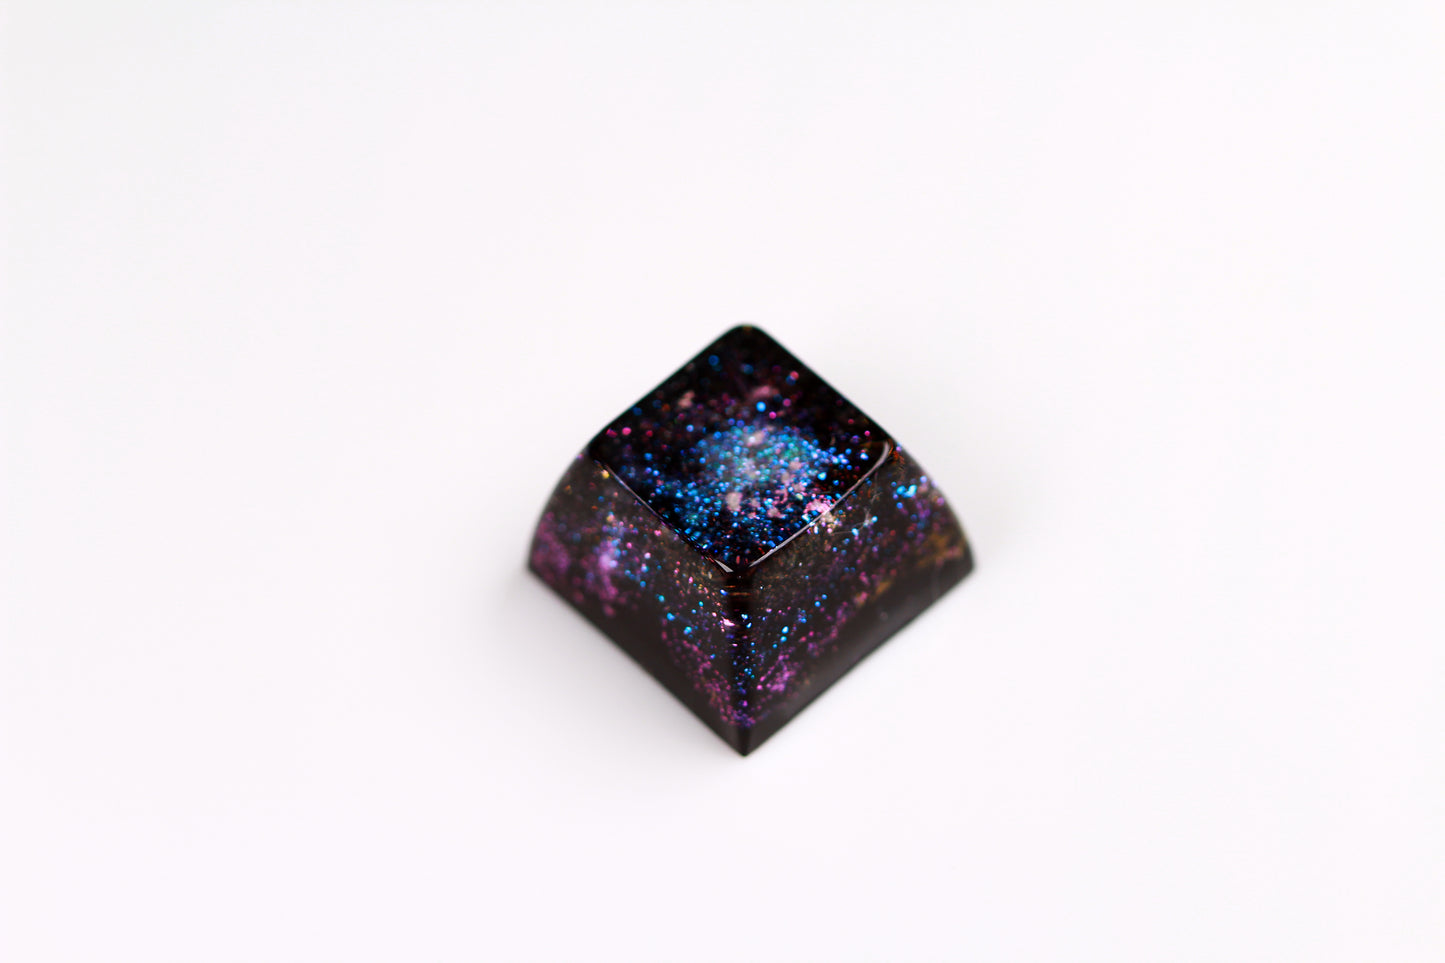 Gimpy SA Row 3 - Deep Field Particle Stream 4 - PrimeCaps Keycap - Blank and Sculpted Artisan Keycaps for cherry MX mechanical keyboards 